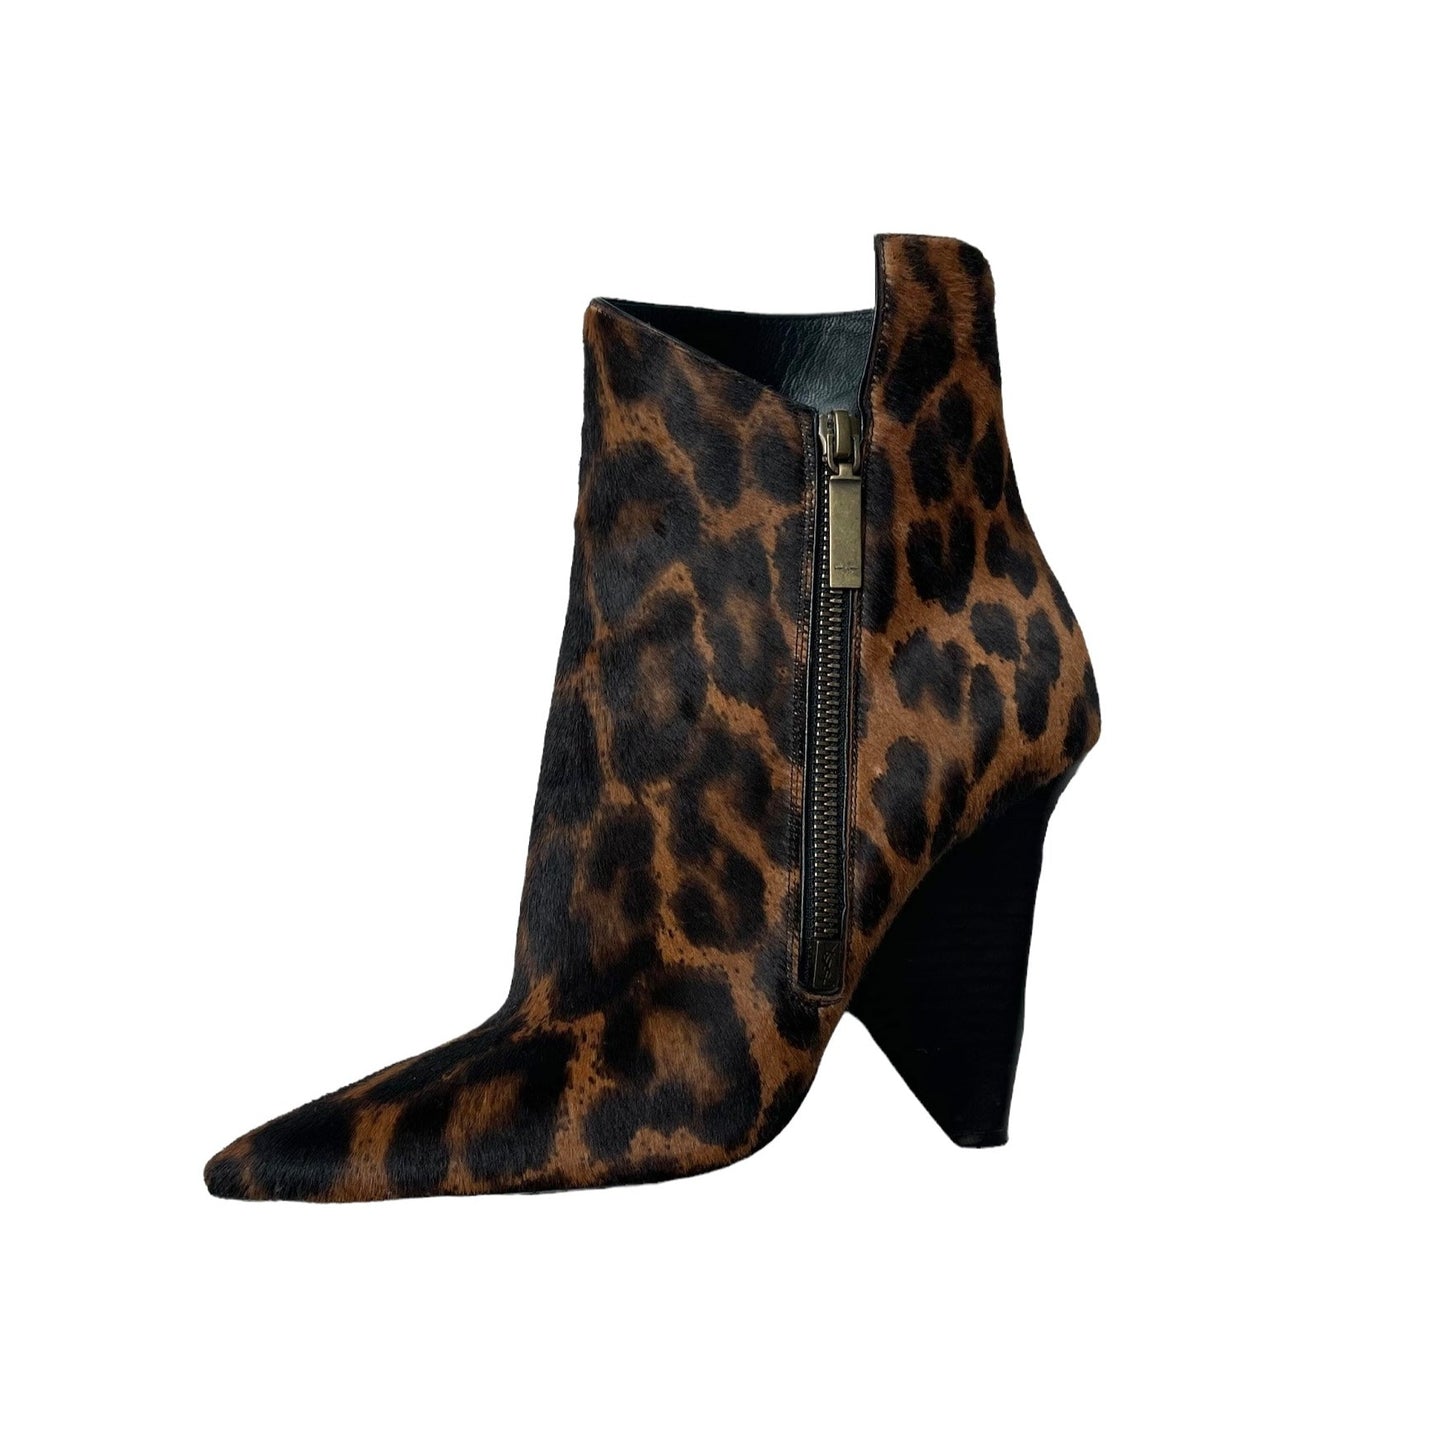 Leopard Hair & Leather Boots - 8